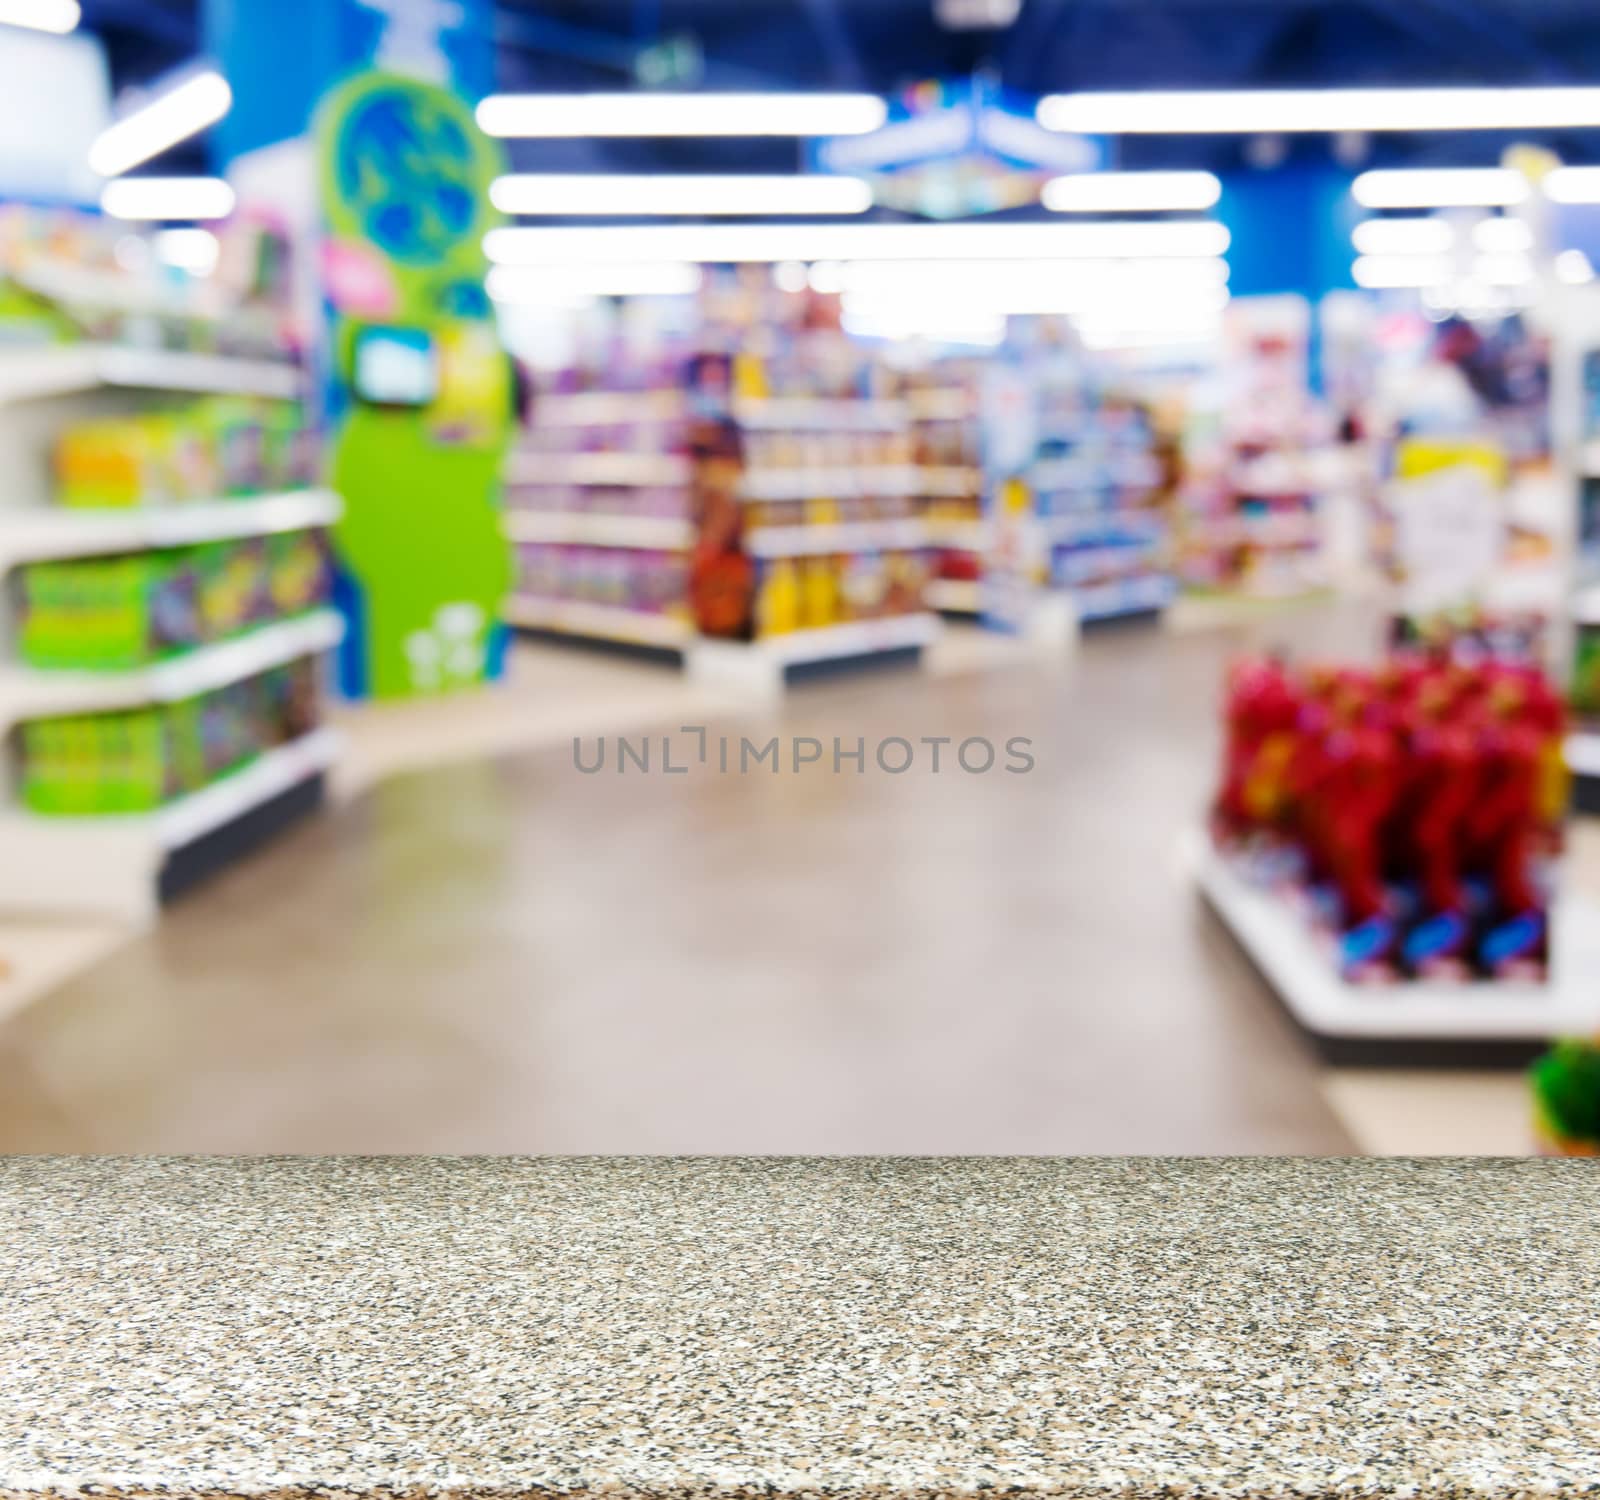 Marble board empty table in front of blurred background. Perspective marble table over blur in kids toy store. Mock up for display or montage your product.